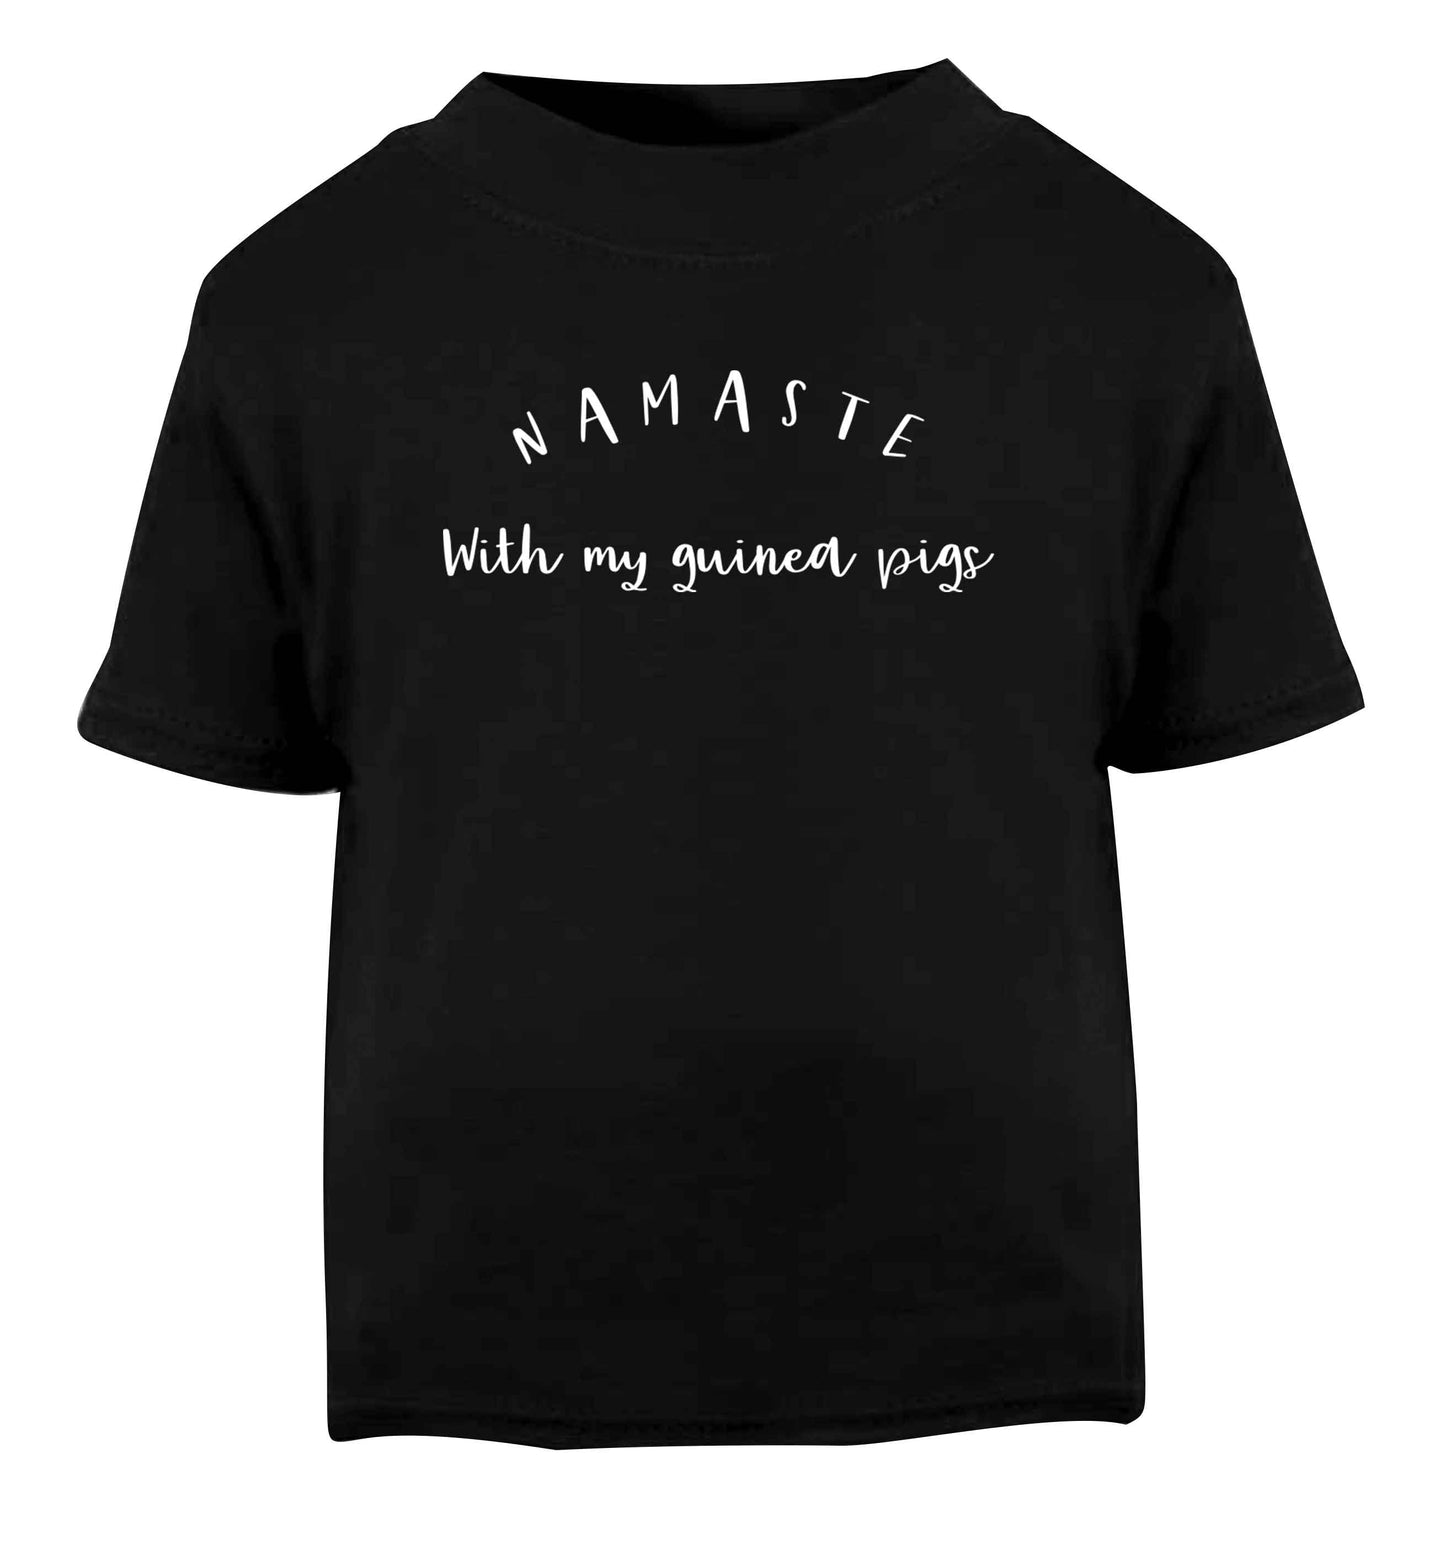 Namaste with my guinea pigs Black Baby Toddler Tshirt 2 years